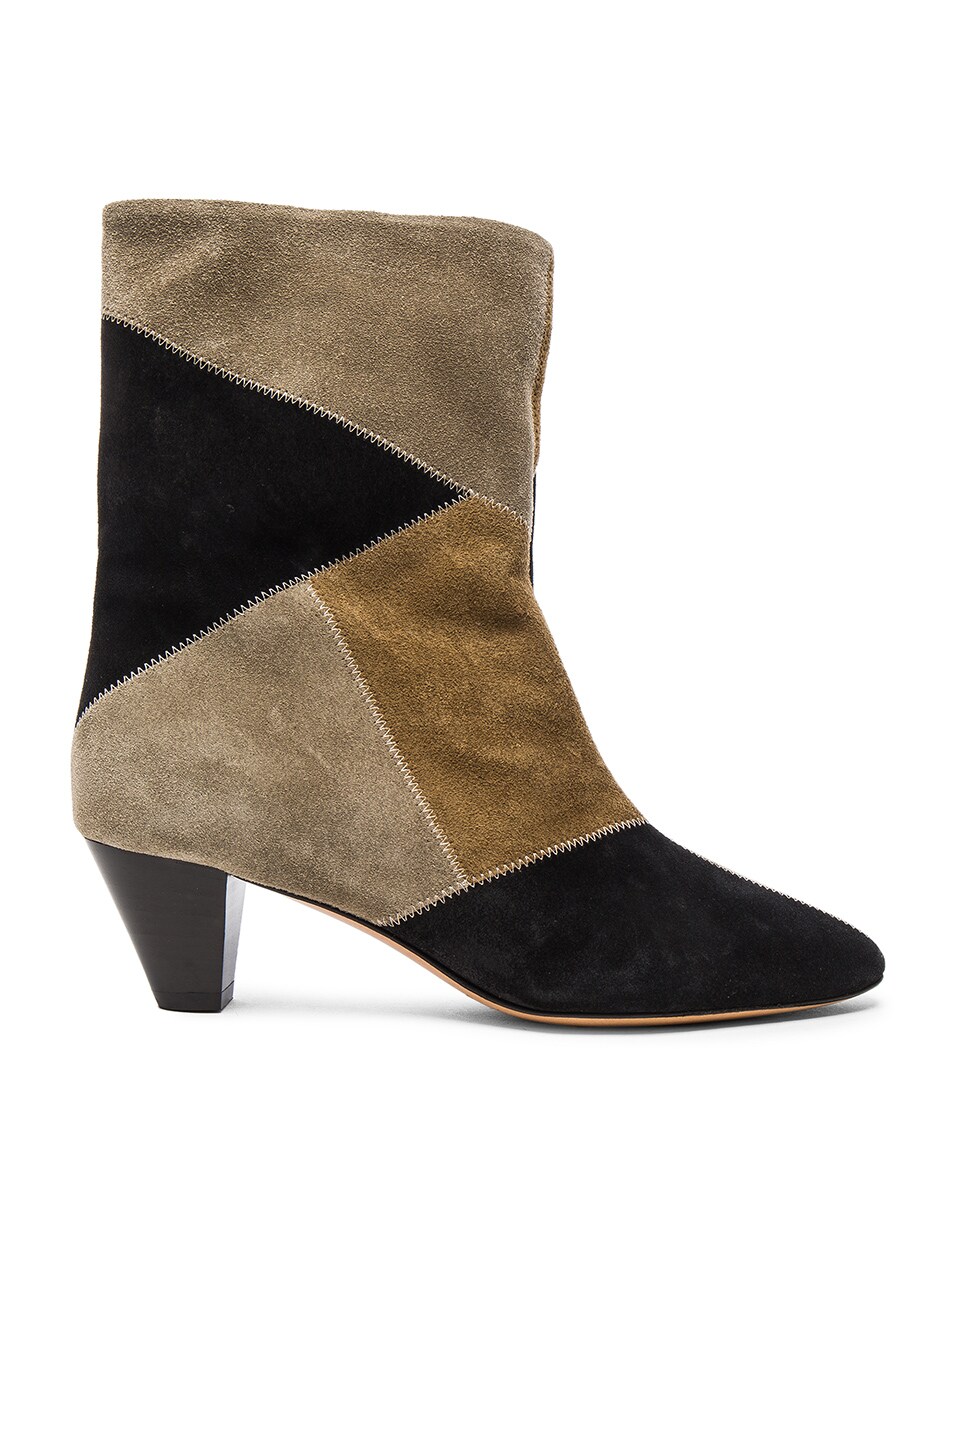 Image 1 of Isabel Marant Etoile Dexton Patch Velvet Booties in Black & Taupe